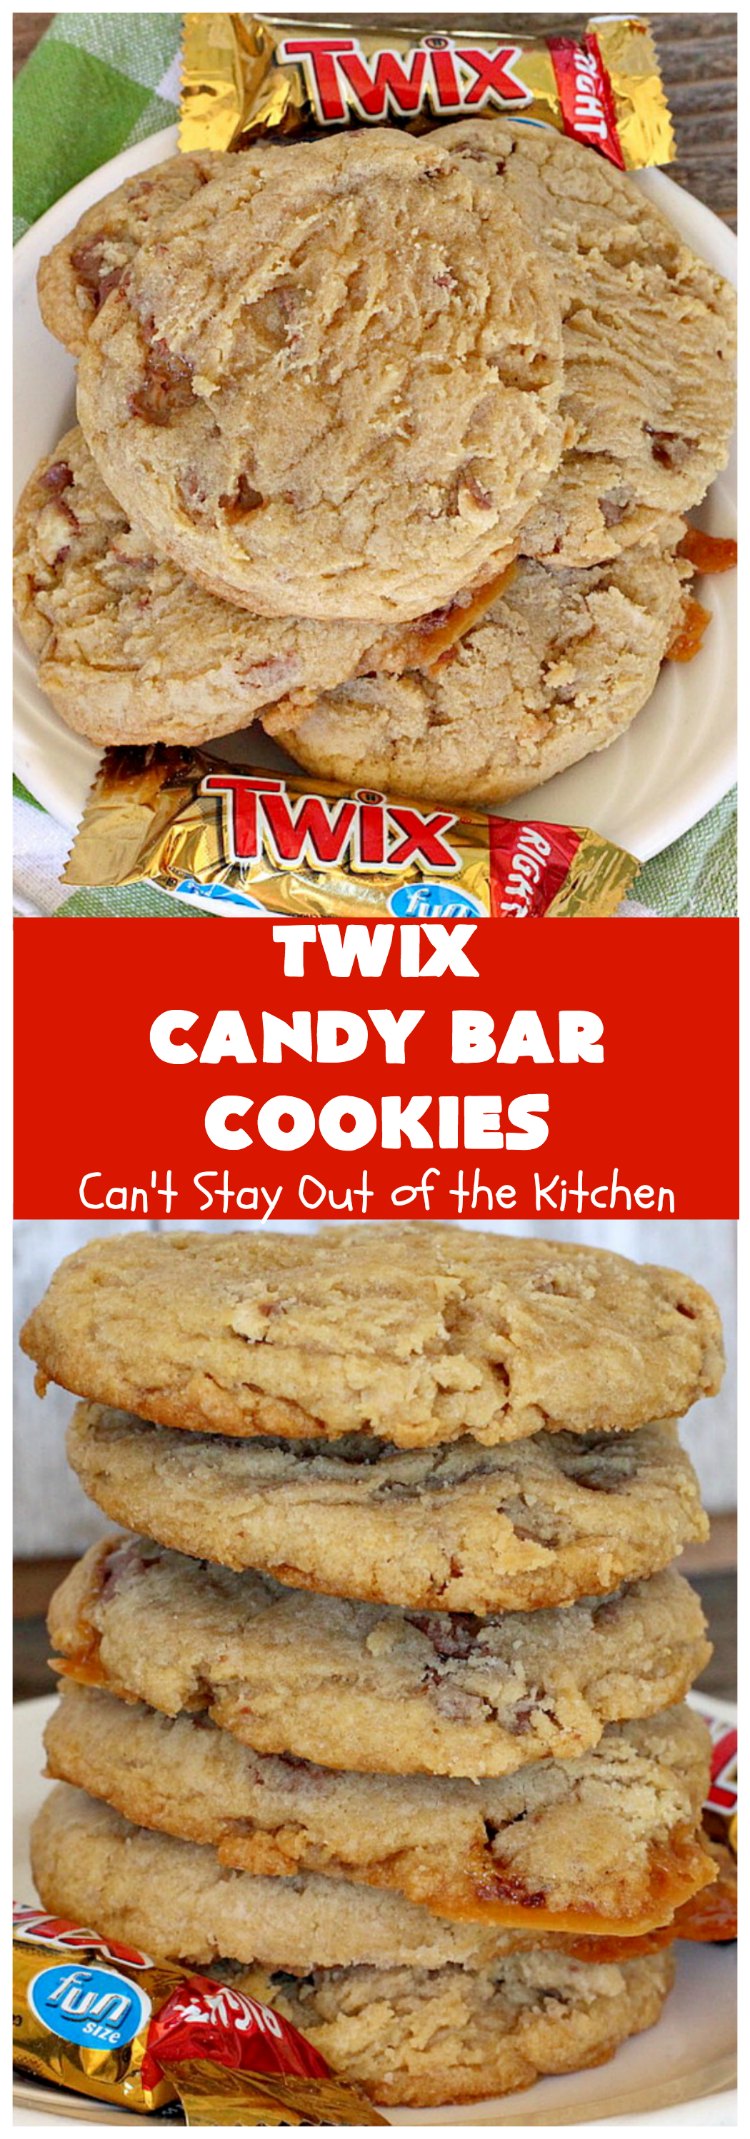 Twix Candy Bar Cookies | Can't Stay Out of the Kitchen | these fantastic #cookies are to die for! They're filled with #TwixCandyBars so they have great #chocolate & #caramel taste. We gave them out for a local town Christmas celebration & hundreds of folks raved over these goodies. #dessert #Holiday #HolidayDessert #CaramelDessert #ChocolateDessert #TwixCandyBarDessert #TwixCandyBarCookies  #ChristmasCookieExchange #tailgating